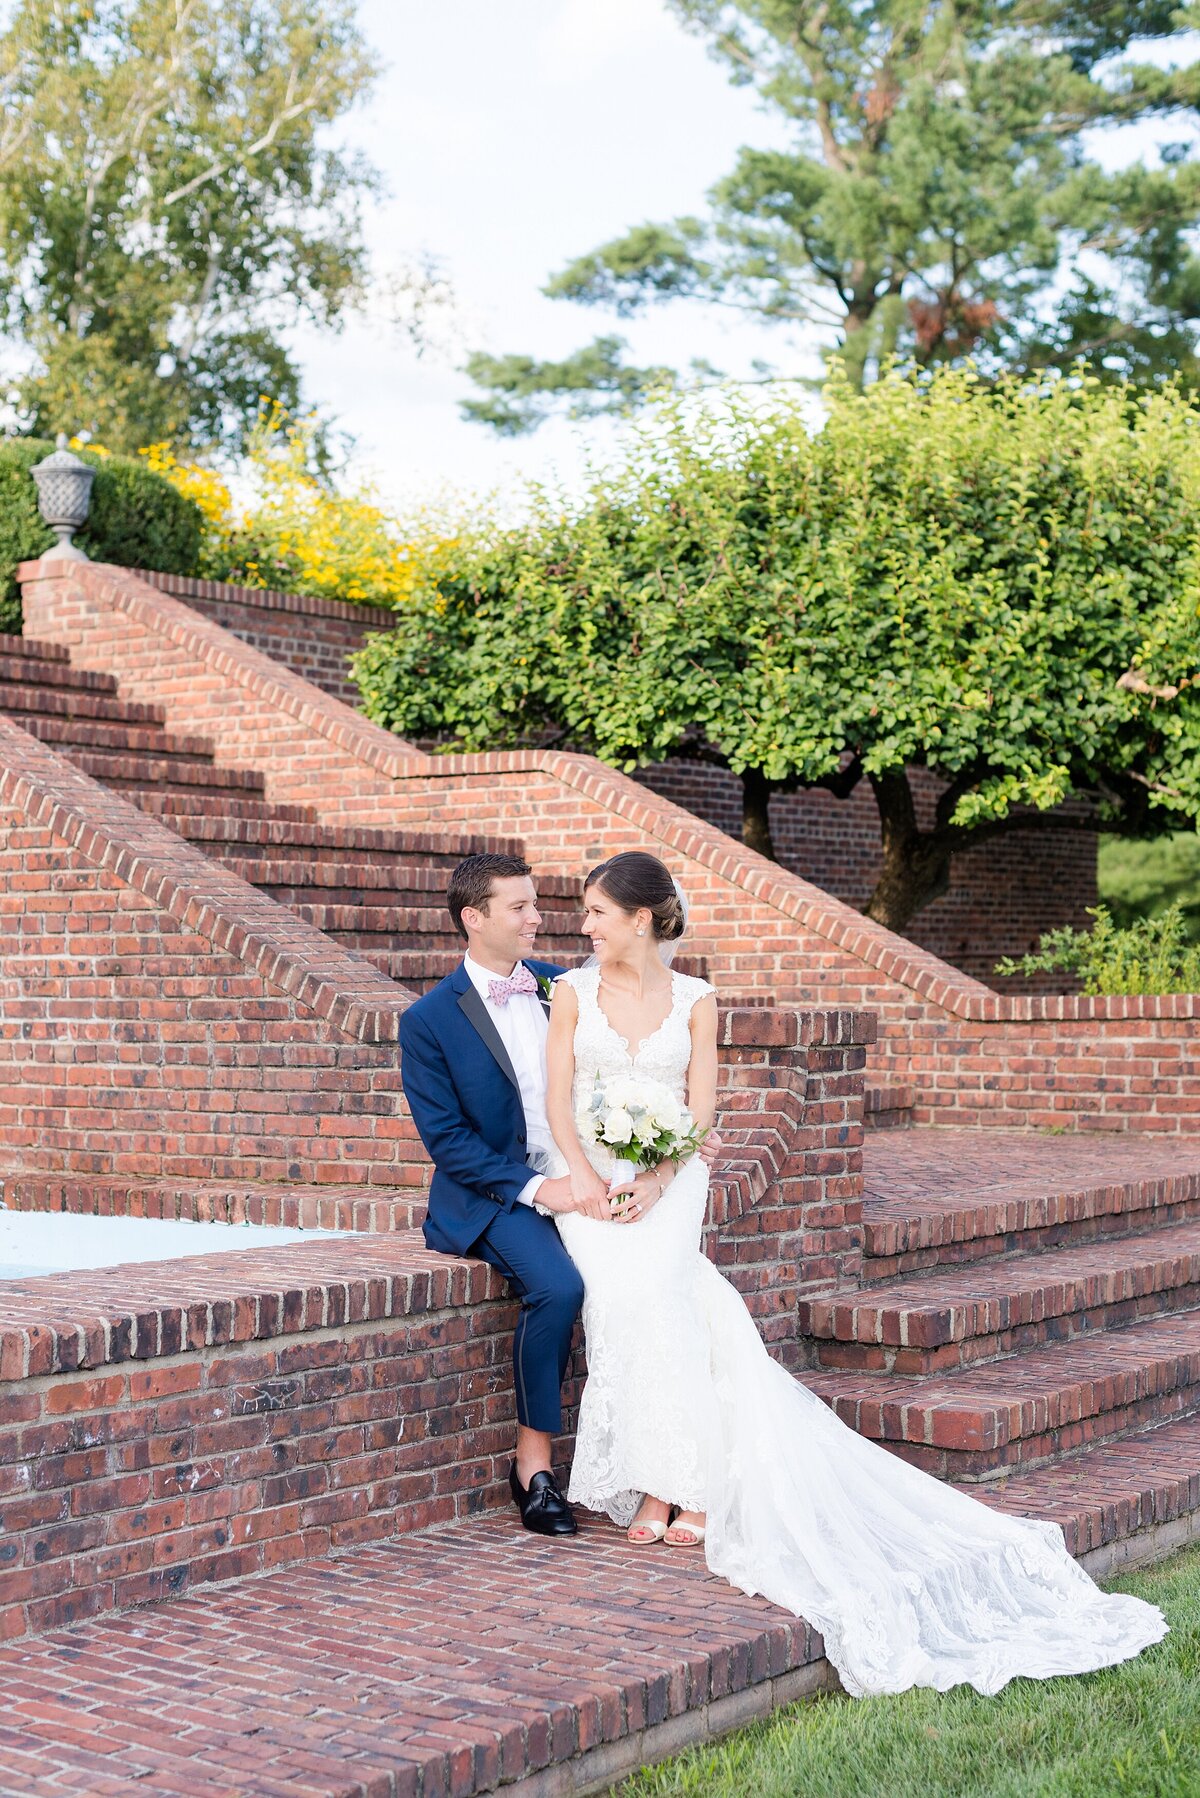 32_bride-and-groom-picture-at mansion-on-the-brick-wall_6075